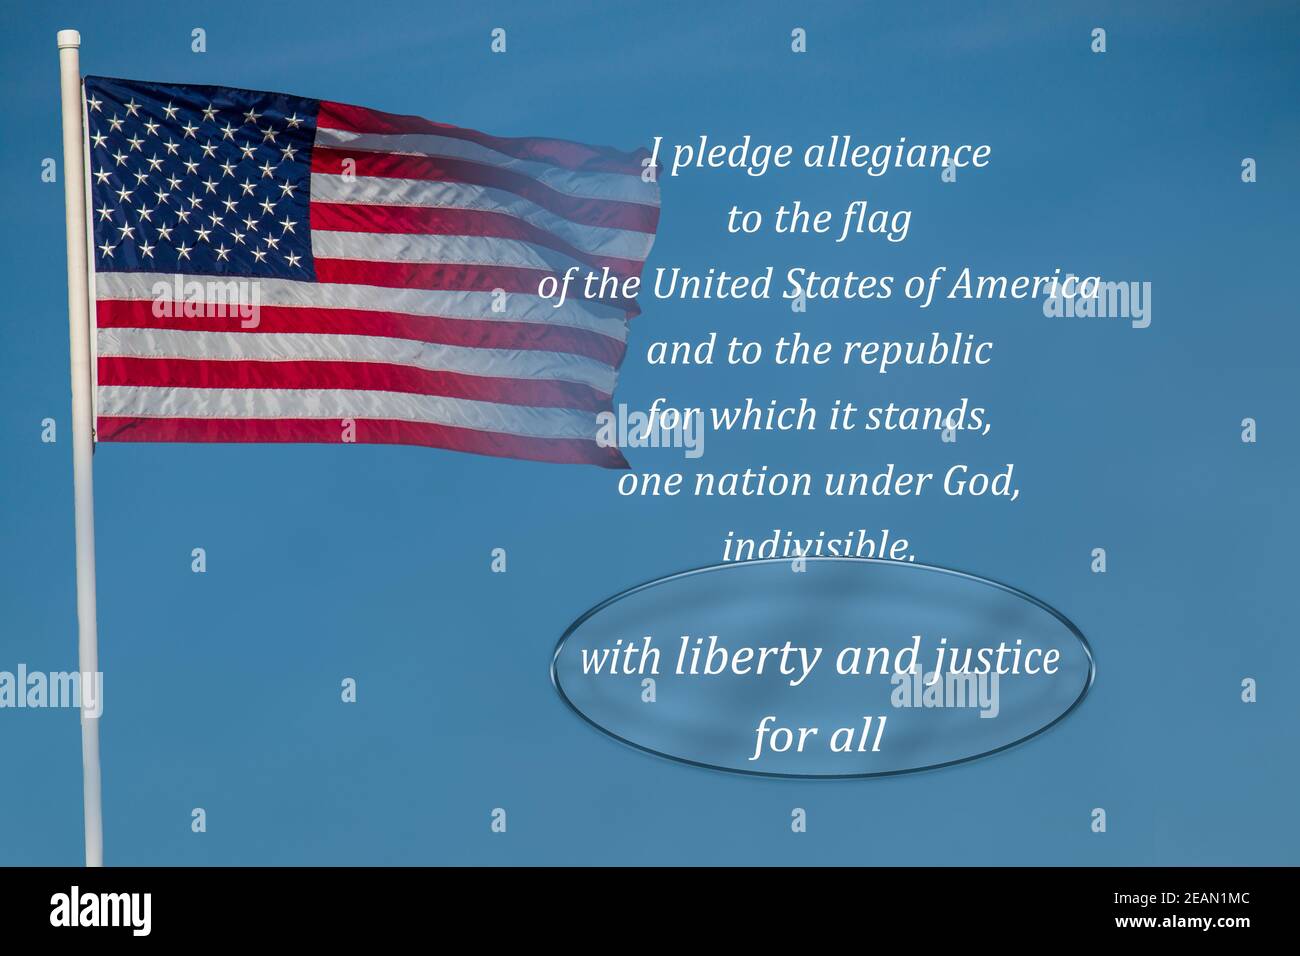 American flag and blue sky background for pledge of allegiance liberty and justice for all under a magnifying glass Stock Photo